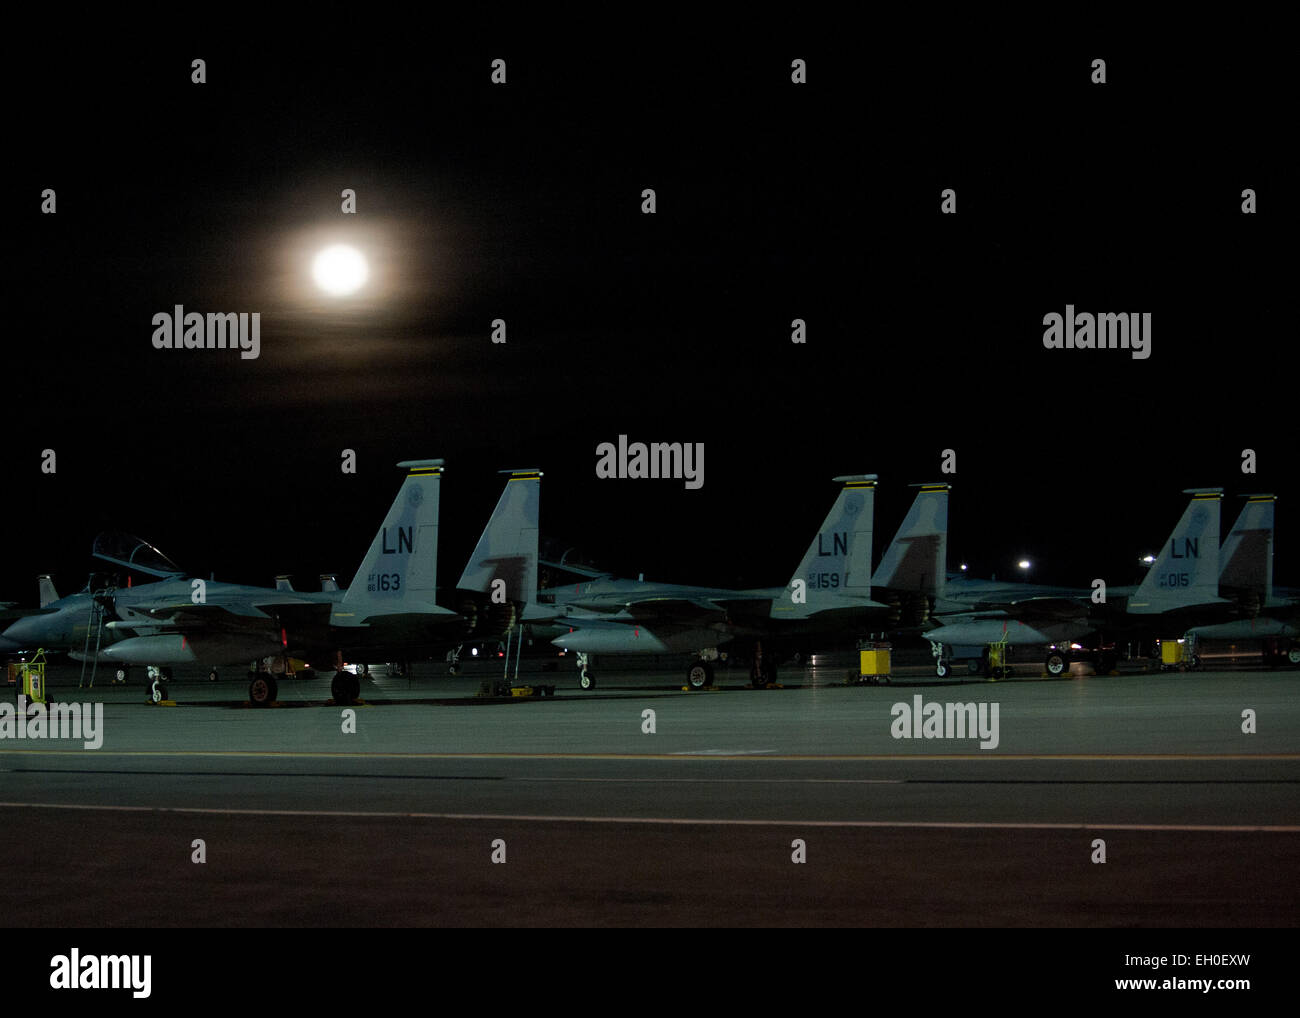 Three F-15 Eagles assigned to the 493rd Fighter Squadron at Royal Air Force Lakenheath, England, sit on the flightline under the moonlight during Red Flag 15-1 at Nellis Air Force Base, Nev., Feb. 4, 2015. Red Flag is a realistic combat training exercise involving the air, space and cyber forces of the U.S. and its allies, and is conducted on the vast bombing and gunnery ranges on the Nevada Test and Training Range during day and night operations. Stock Photo